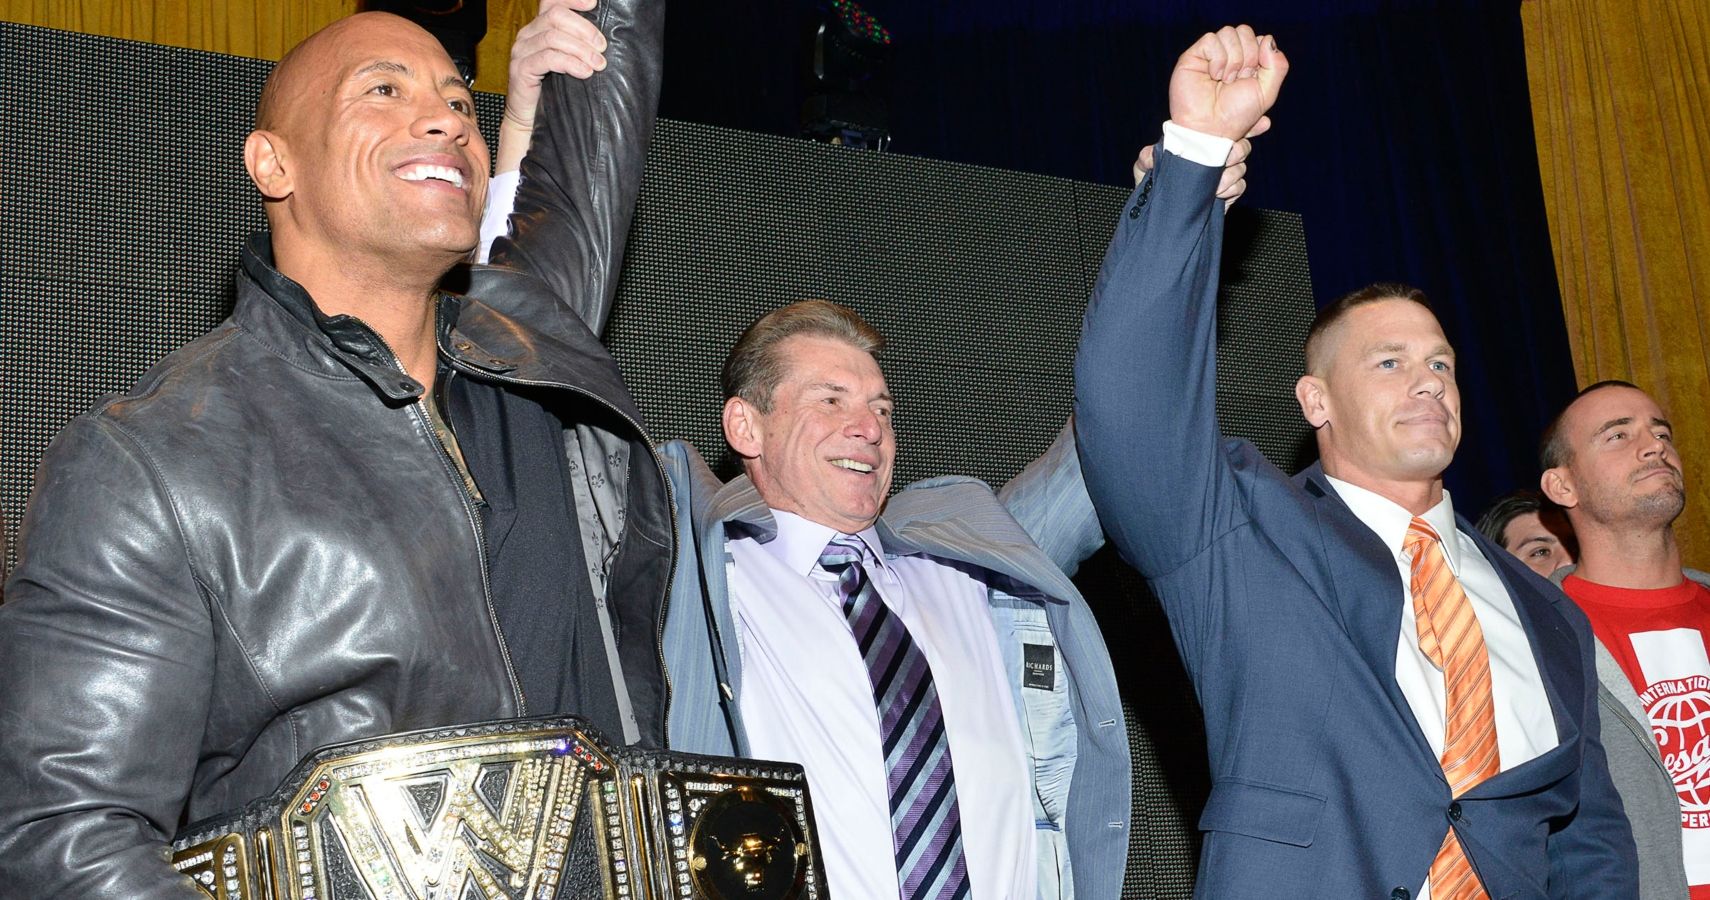 The Rock hints that Vince McMahon's bad advice has buried him almost forever